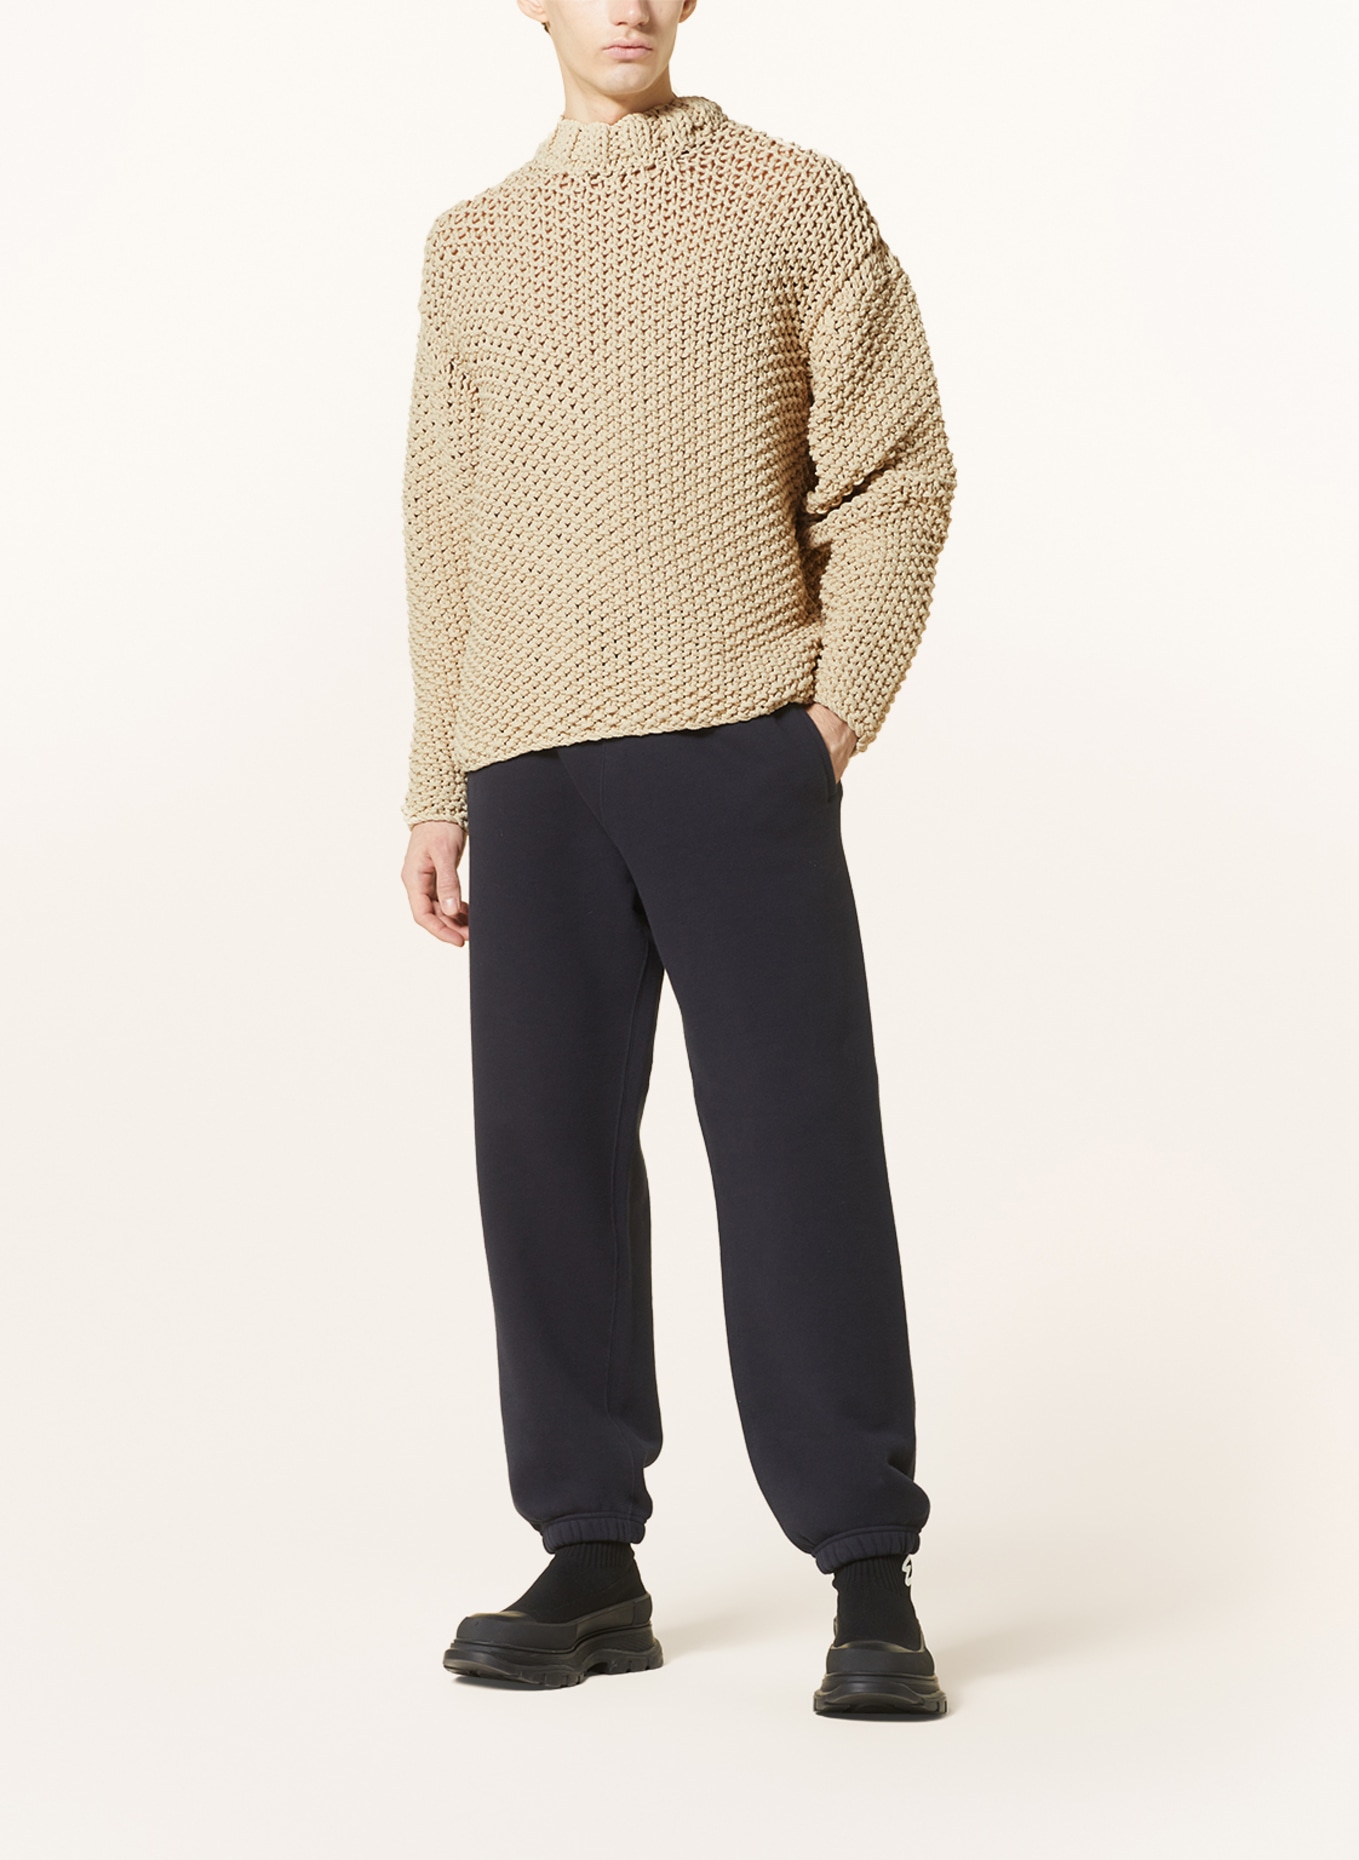 STONE ISLAND Sweater, Color: LIGHT BROWN (Image 3)